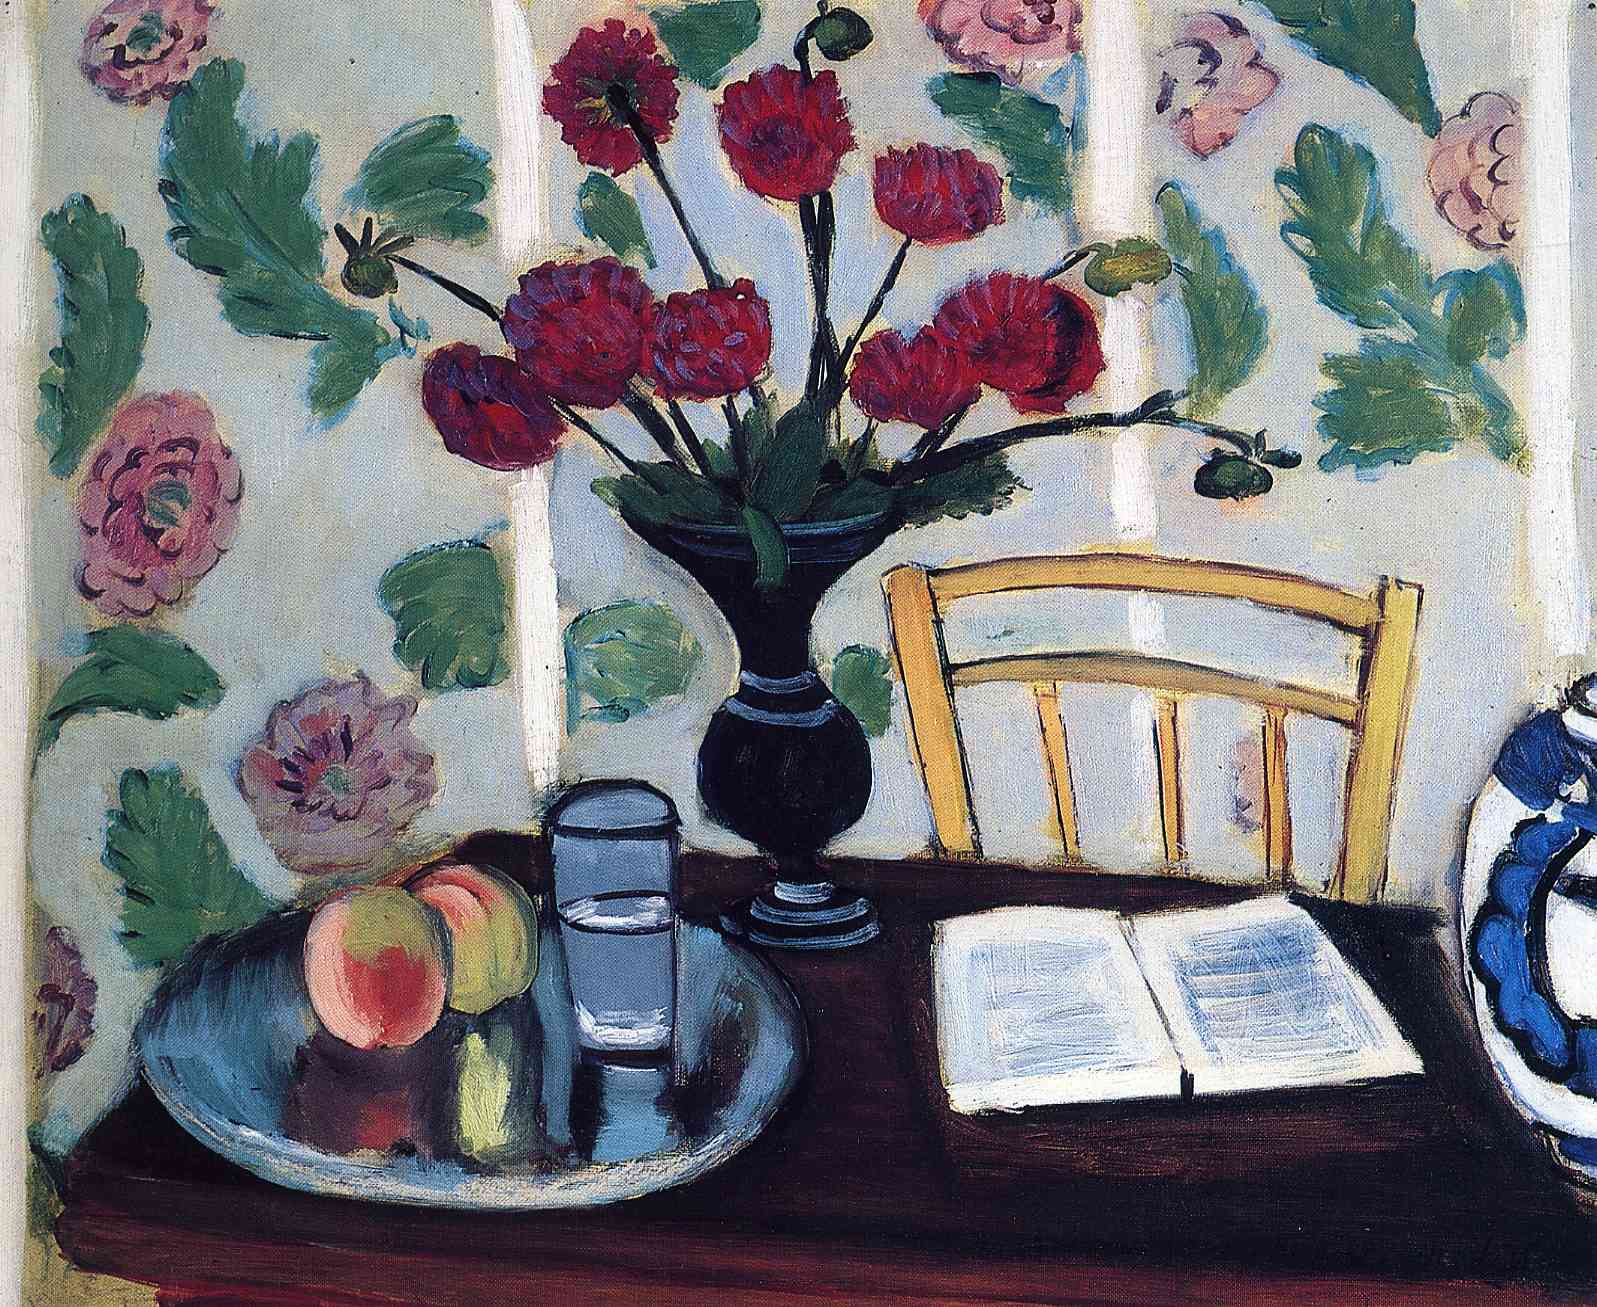 Bouquet of Dahlias and White Book, 1923 - Henri Matisse - WikiArt.org